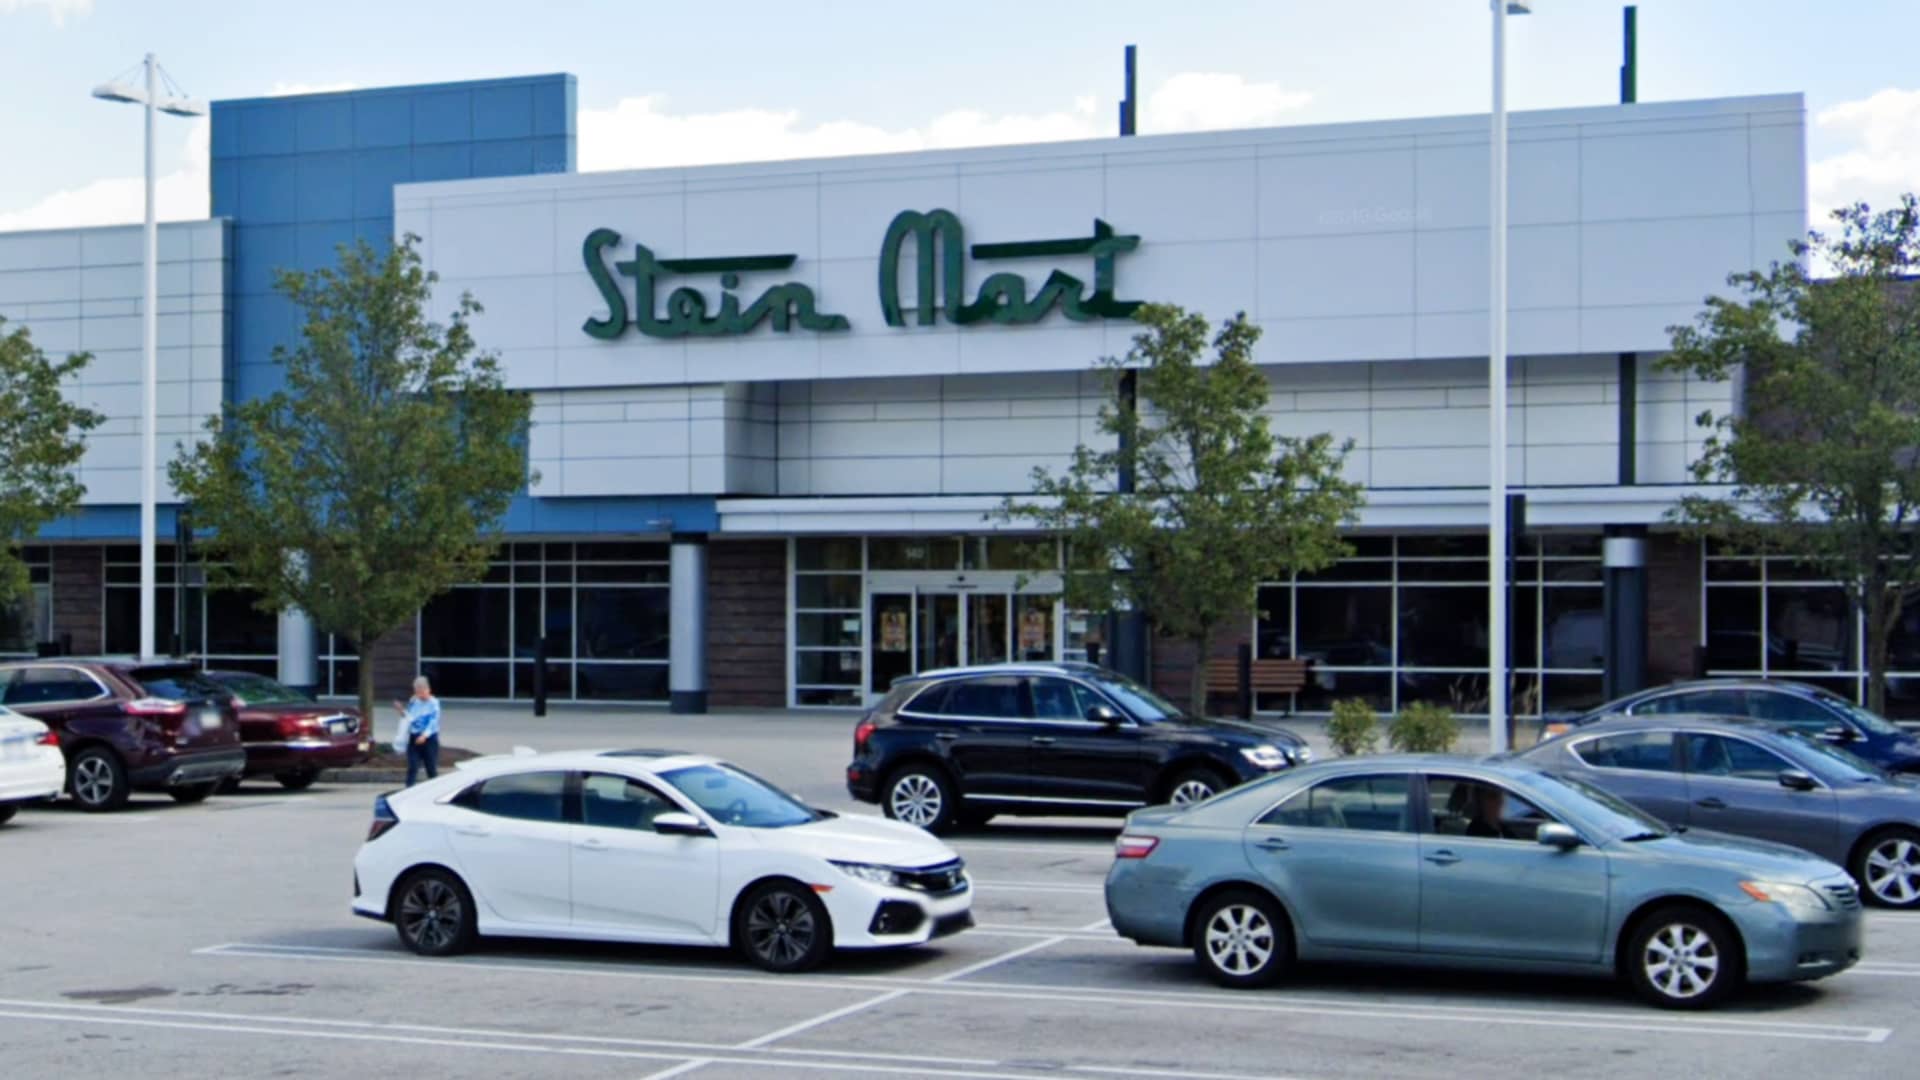 Stein Mart Store Display Auction, May 18, 2021